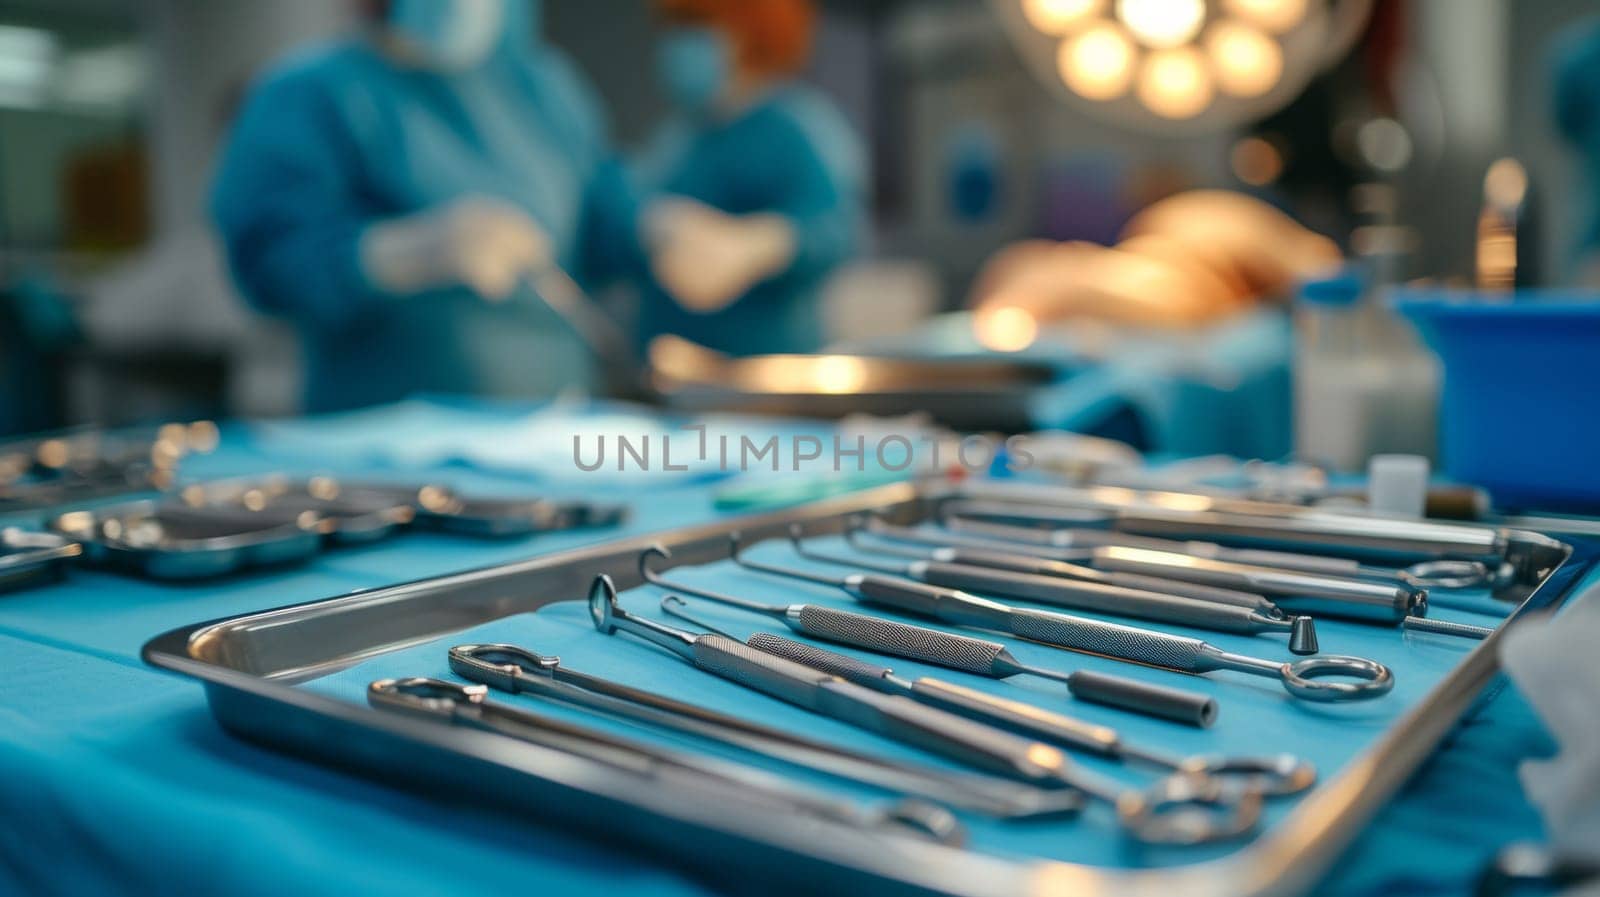 A tray of surgical tools on a table in an operating room